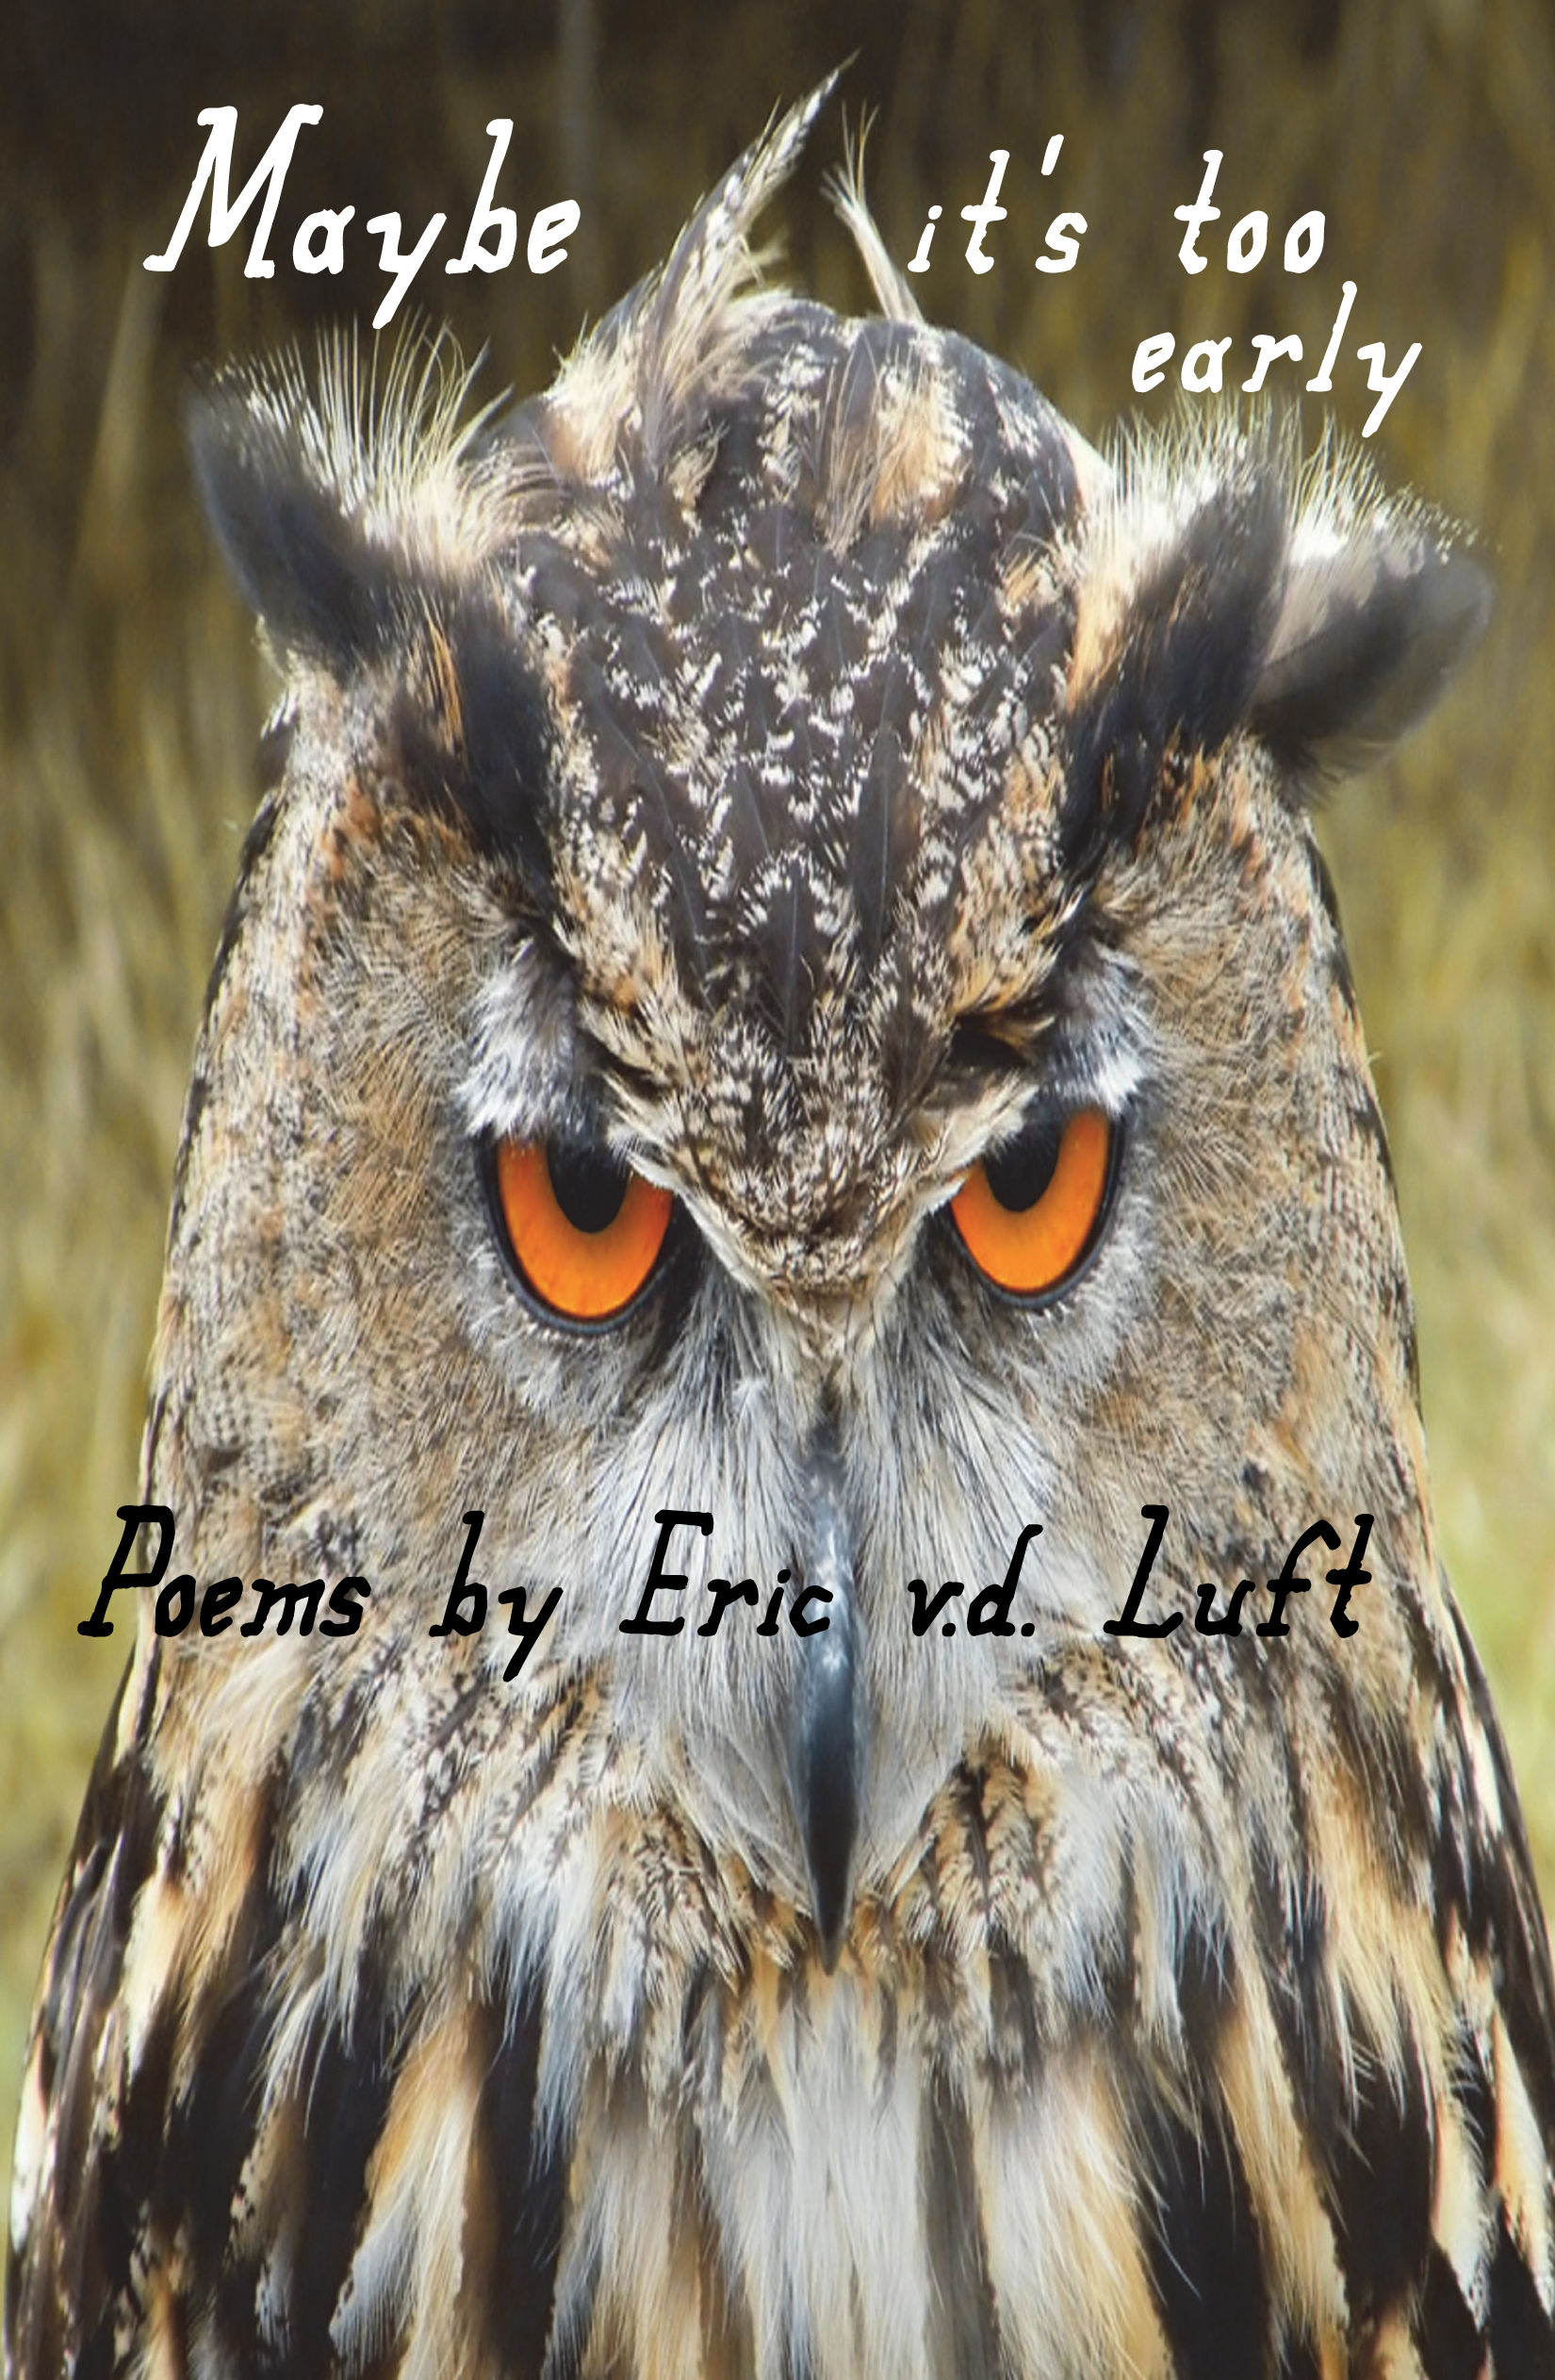 Maybe It's Too Early: Poems by Eric v.d. Luft